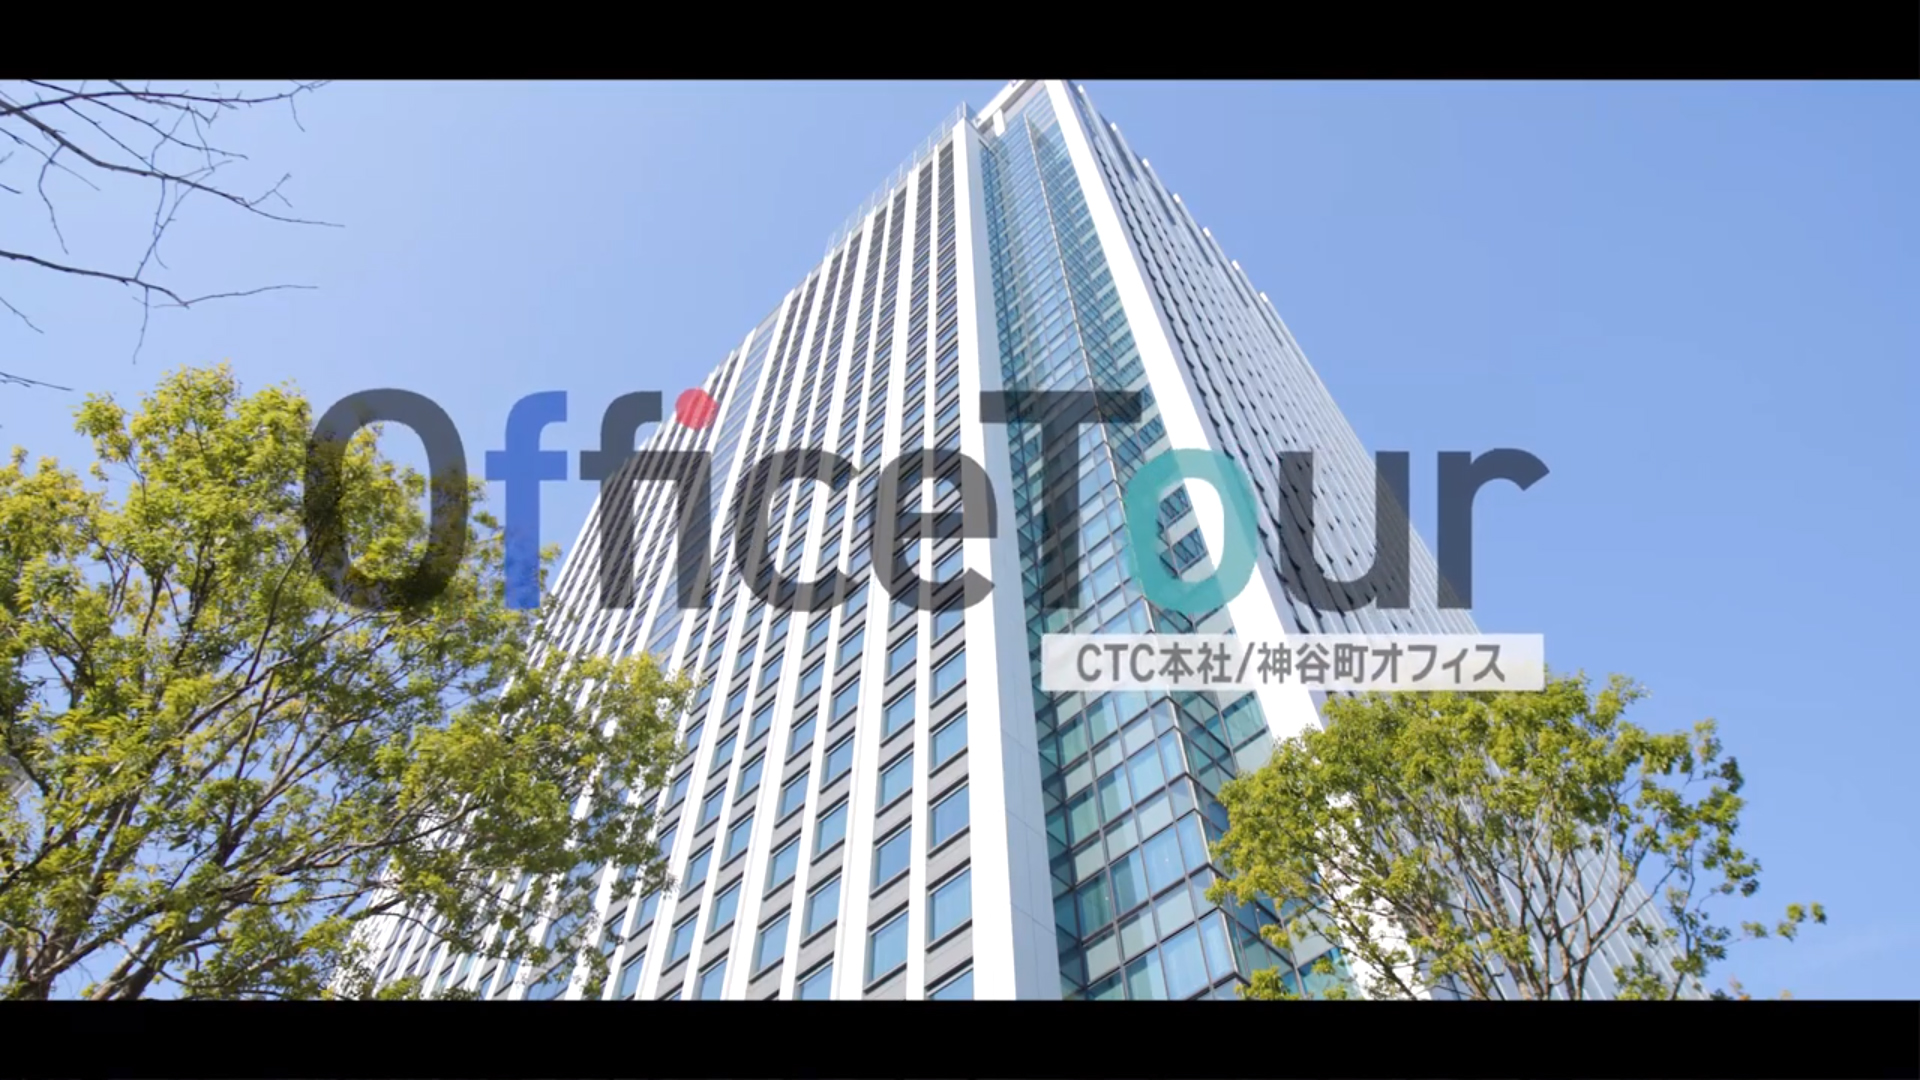 One Day in CTC 営業編